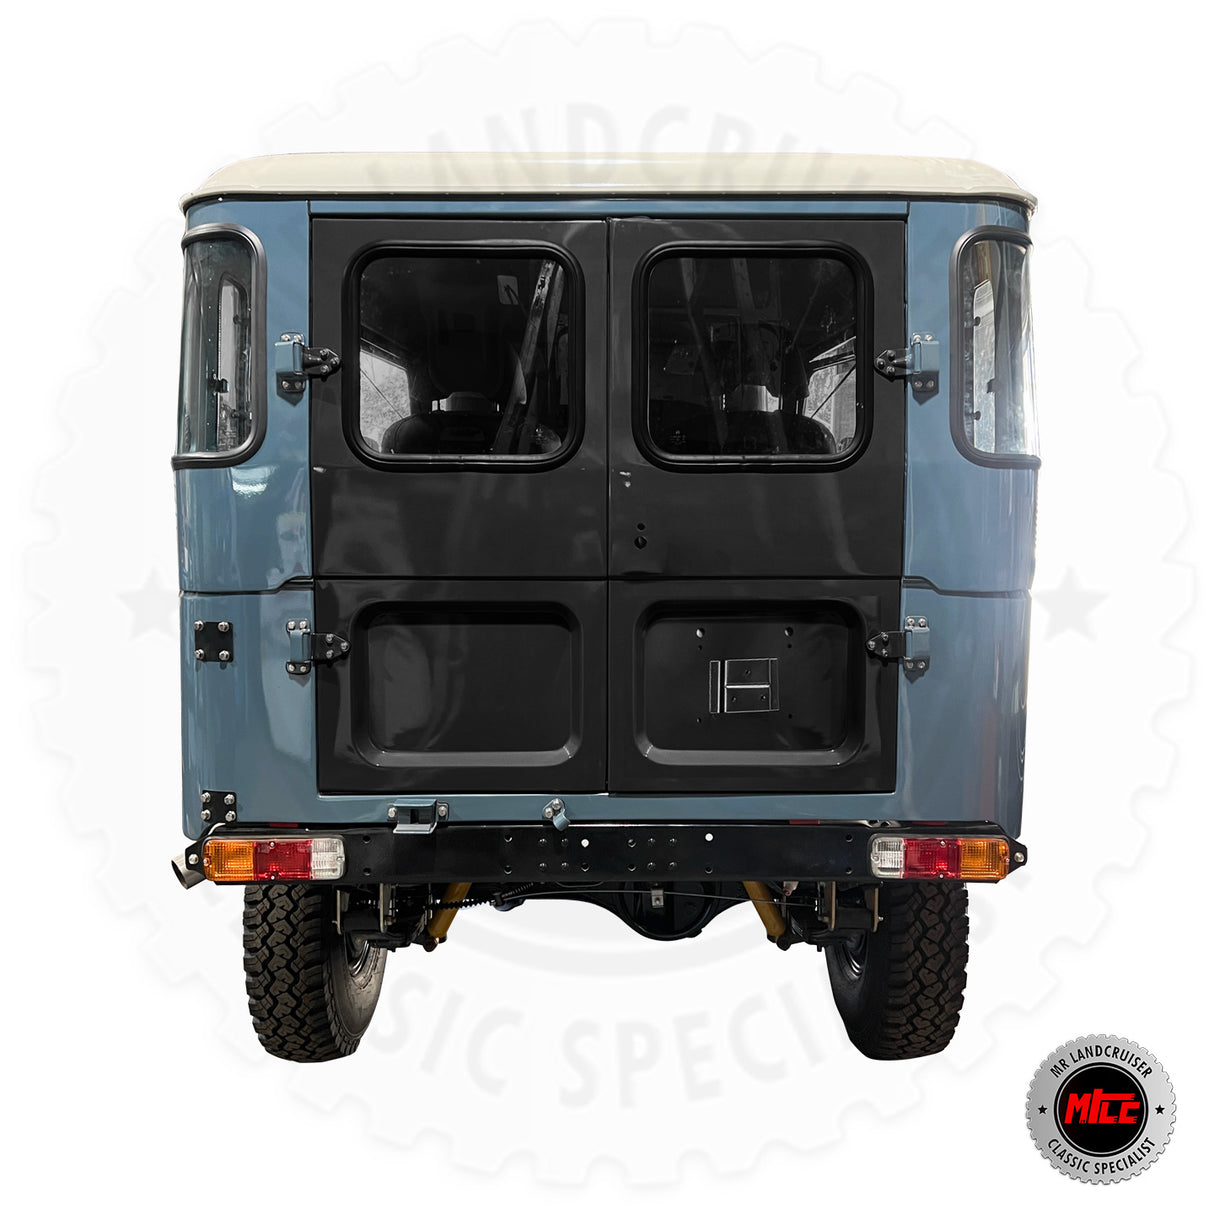 Rear Doors for 40 Series Landcruiser SWB and Troopcarrier